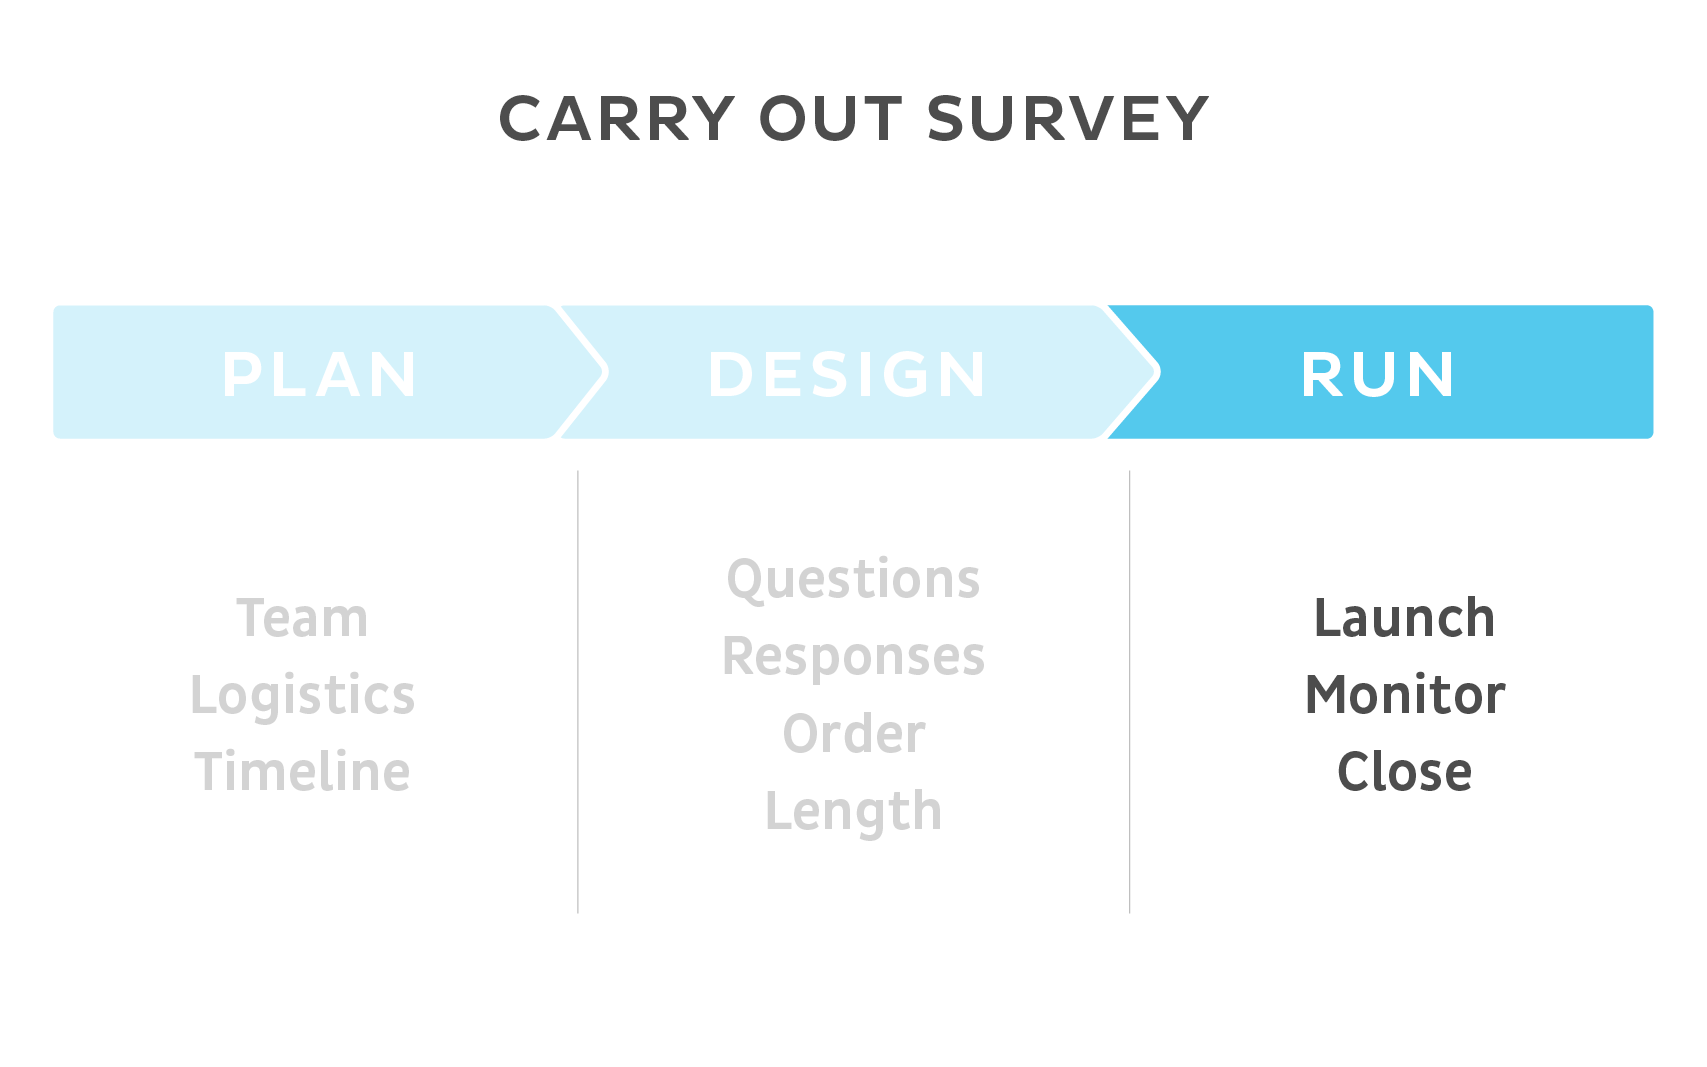 Carry out survey - RUN